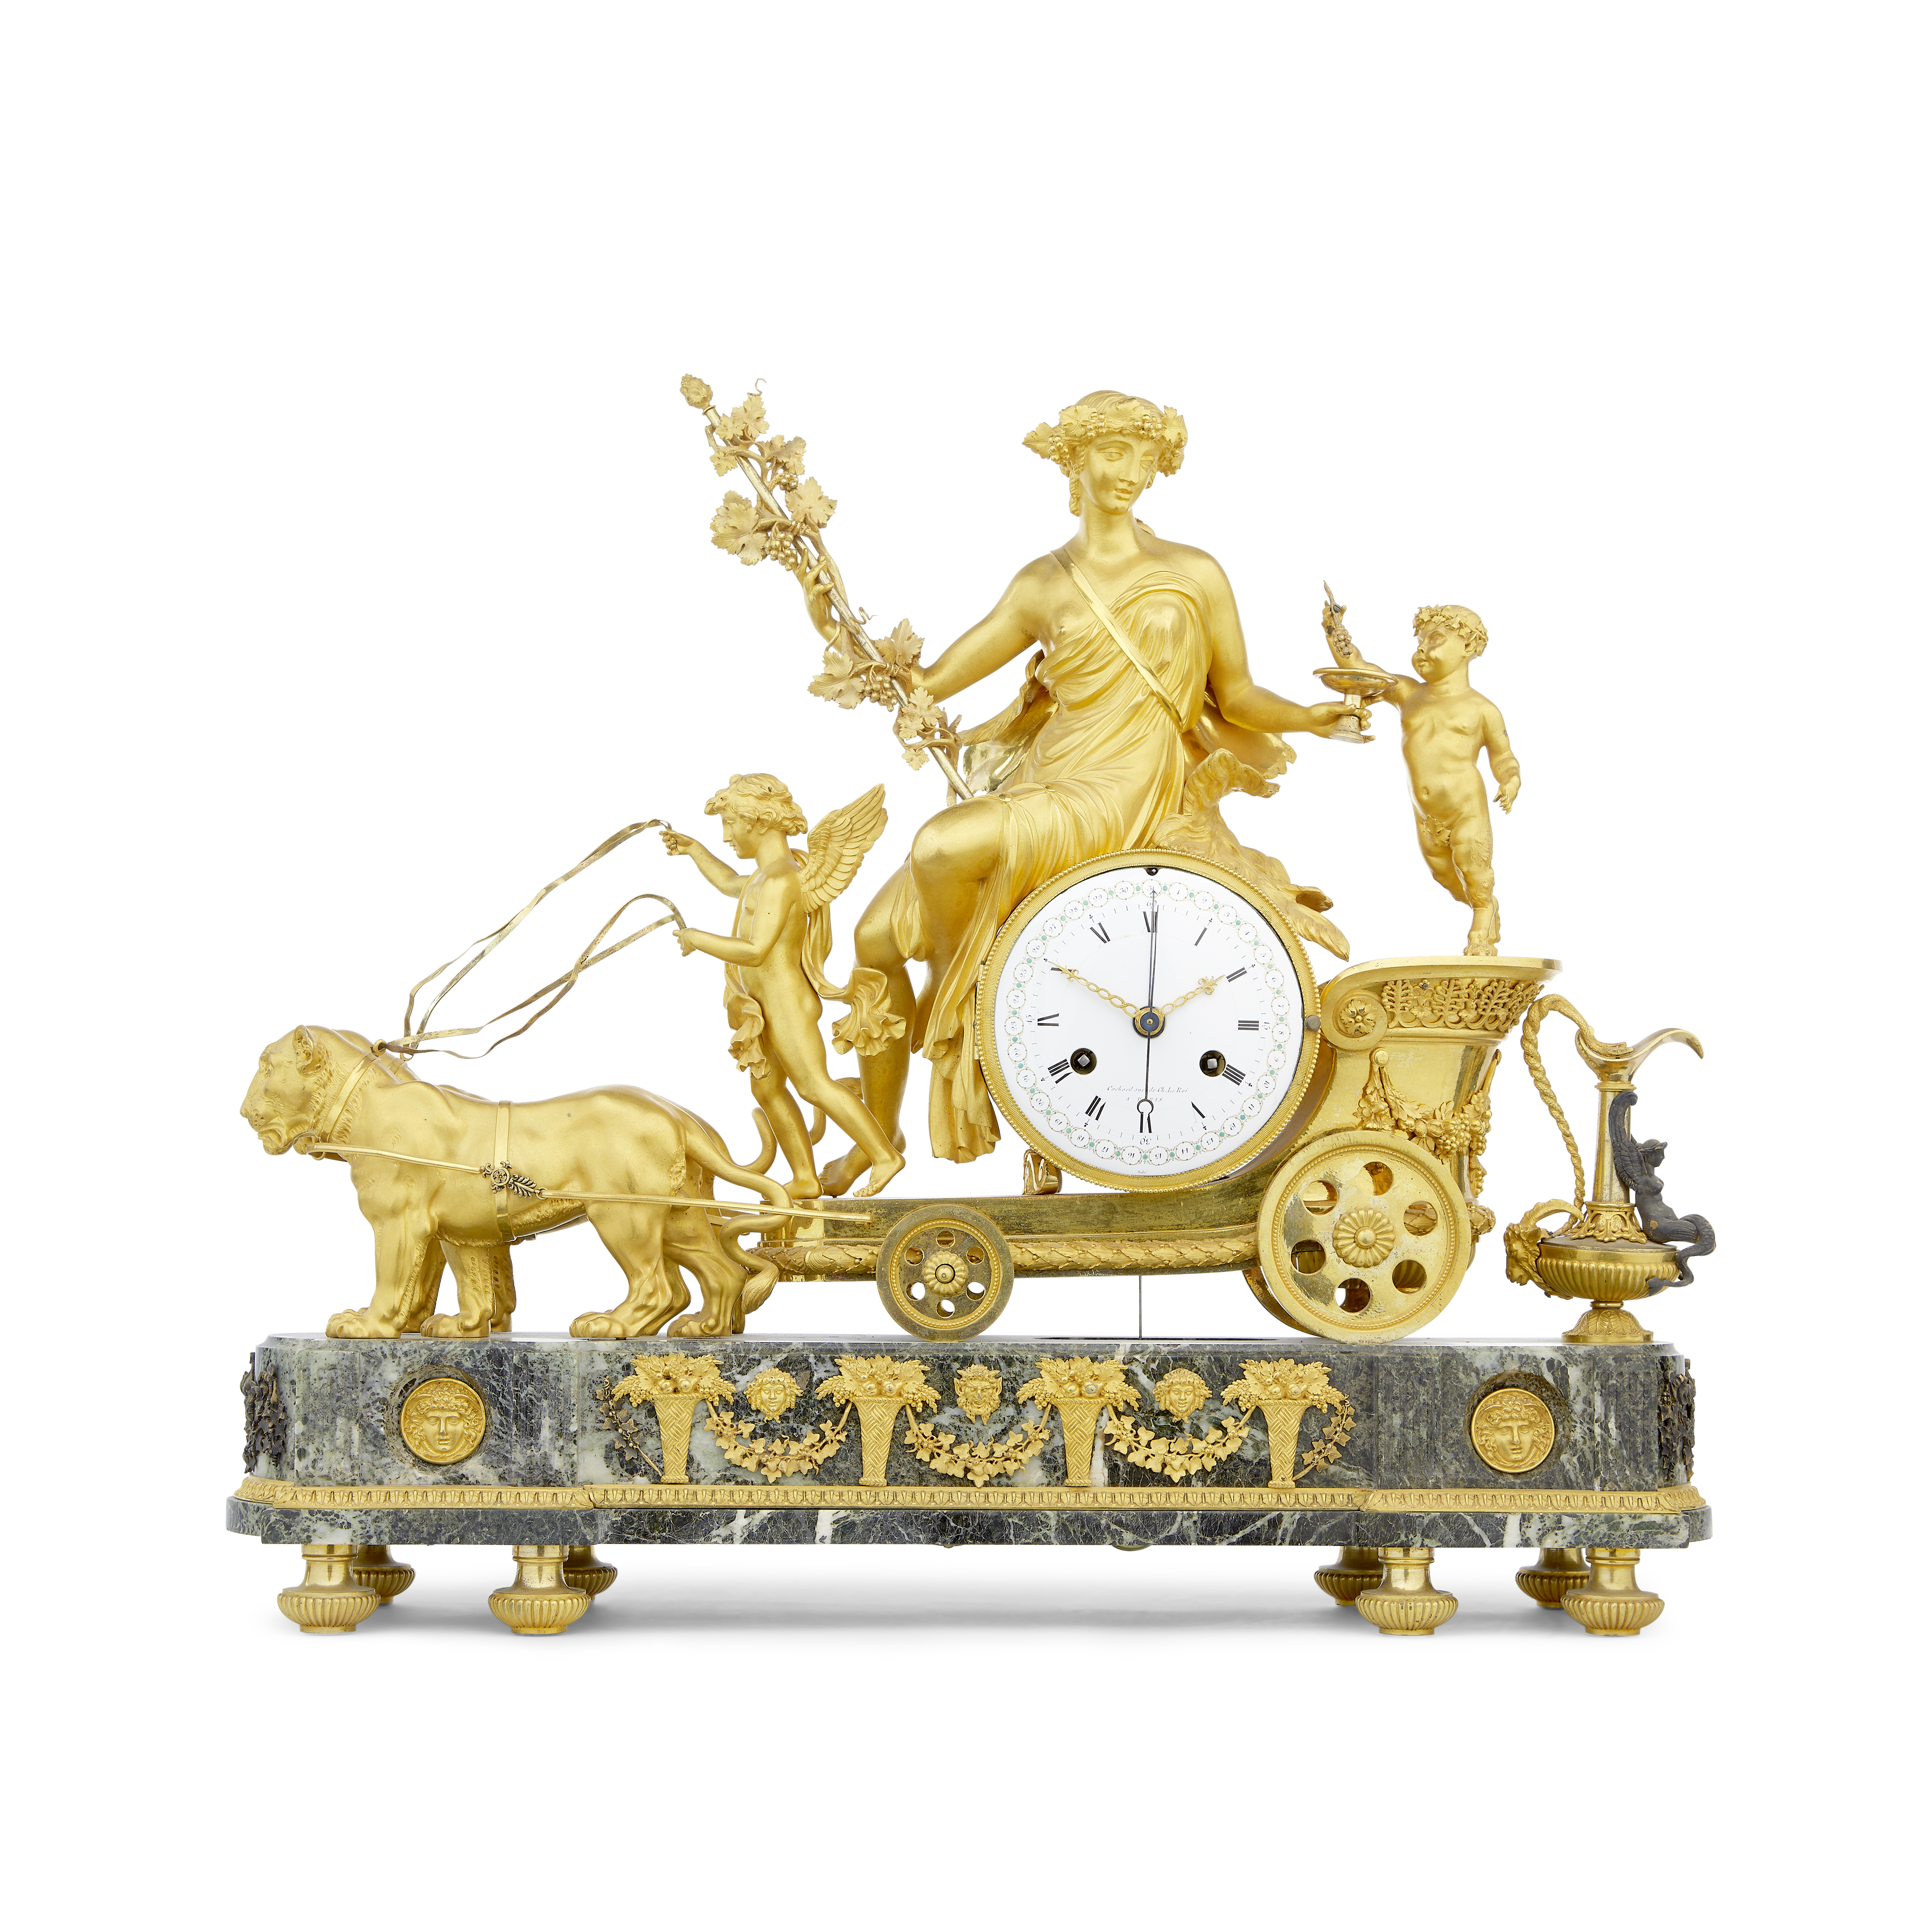 A magnificent early 19th century French ormolu and marble mantel clock with dial by Duboisson, p...